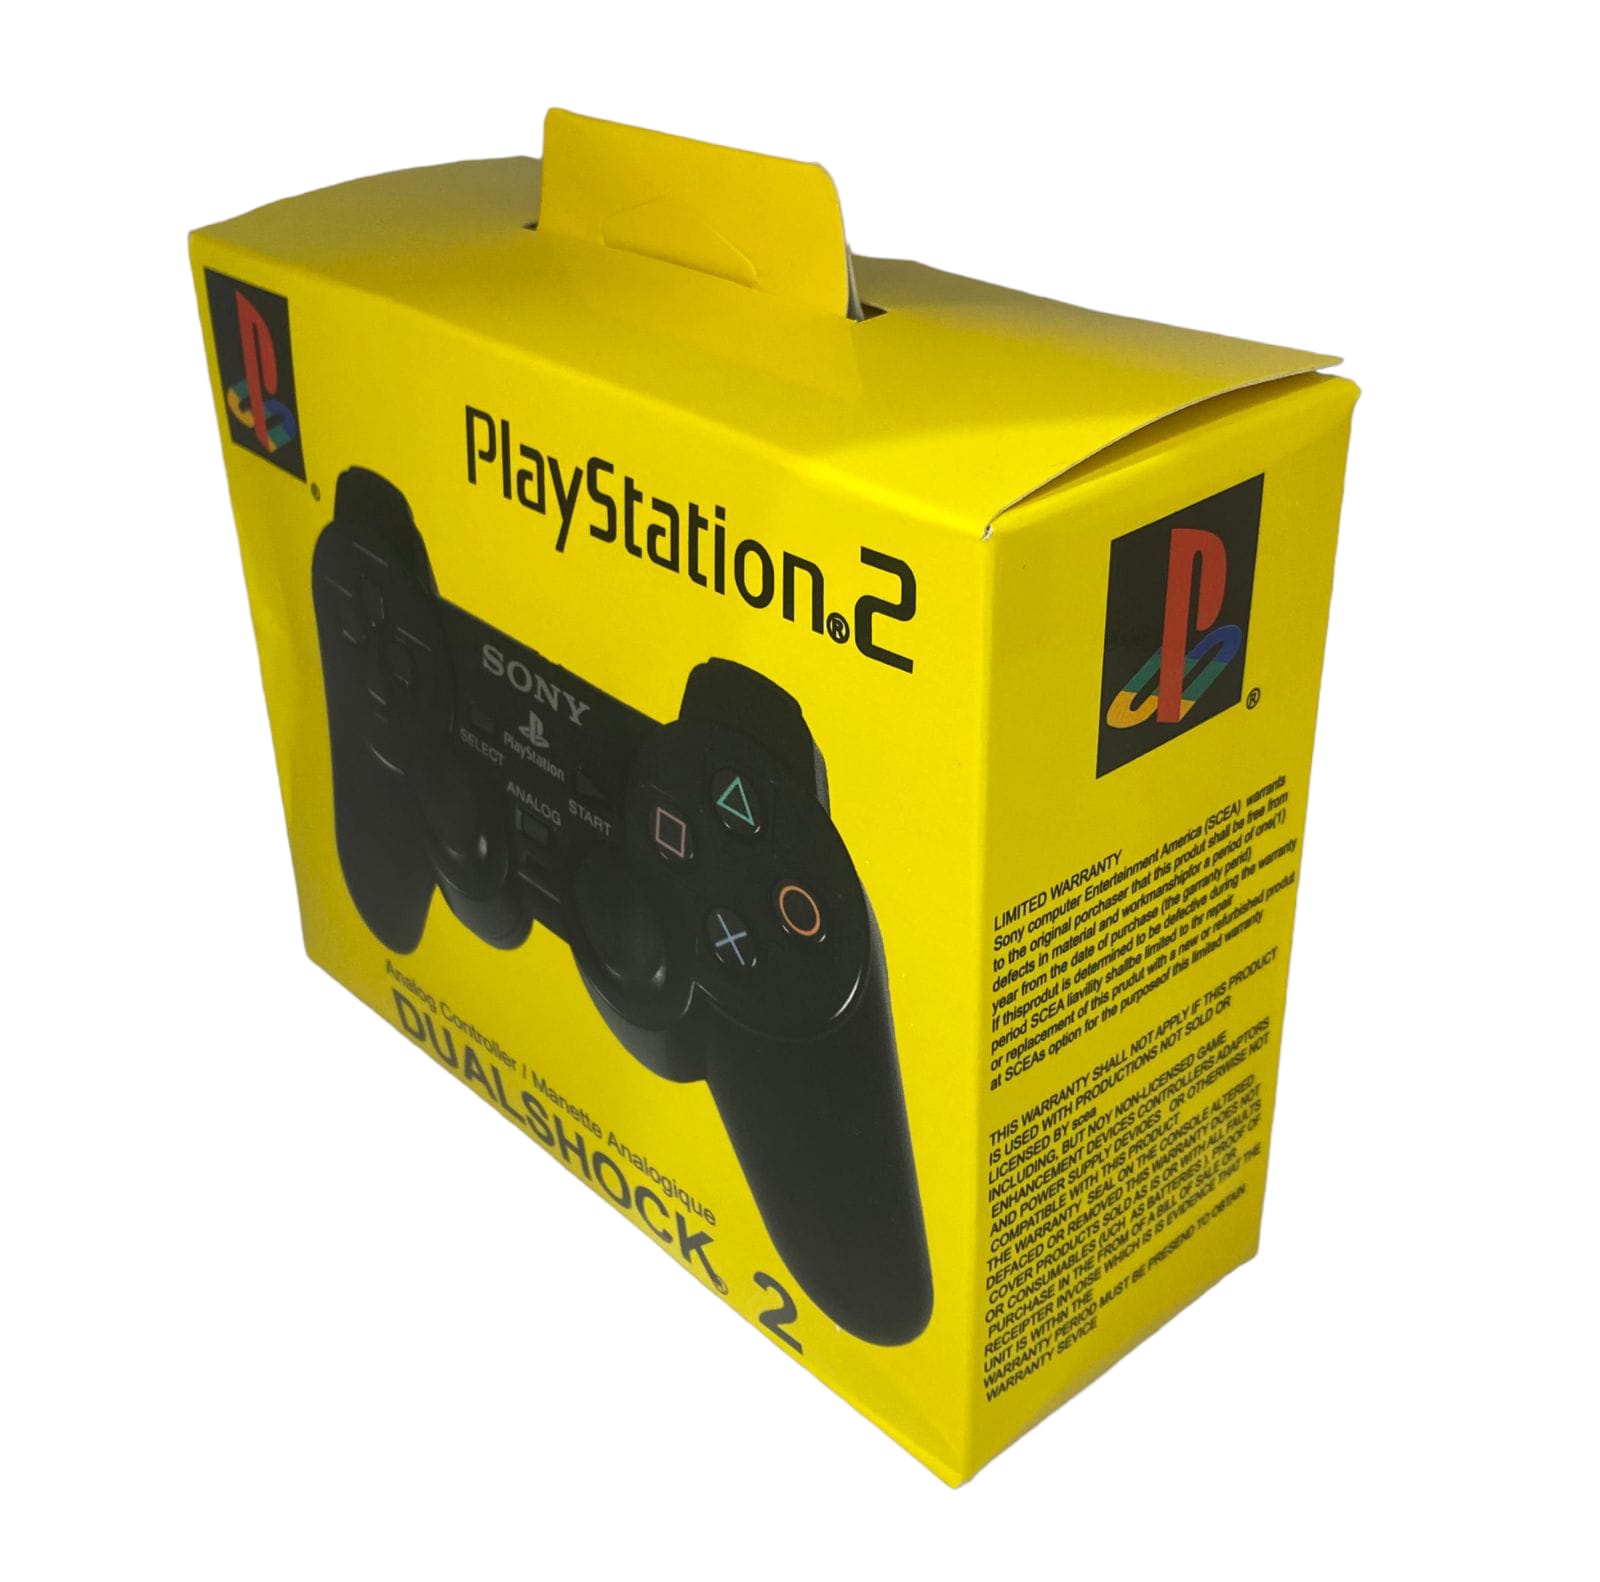 Control PS2 Play Station 2 Dual Shock